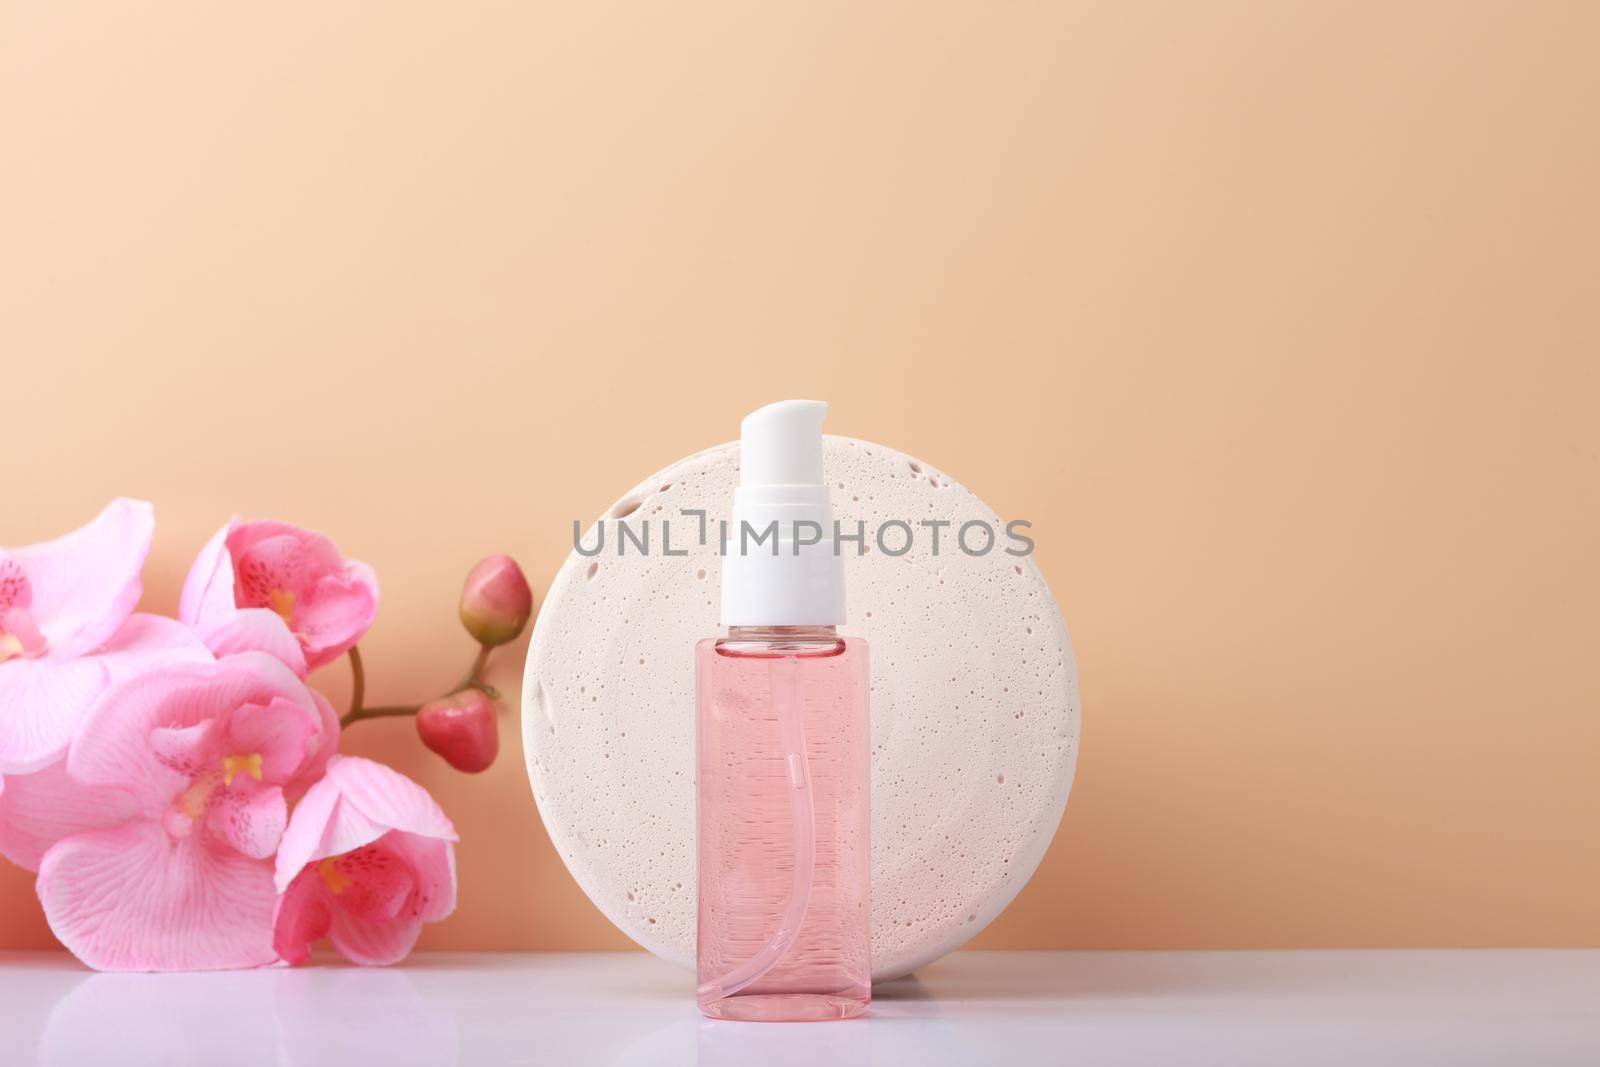 Cleaning foam for skin care against beige background with copy space, round stone podium and pink flower. Concept of natural beauty products for daily skin care and beauty